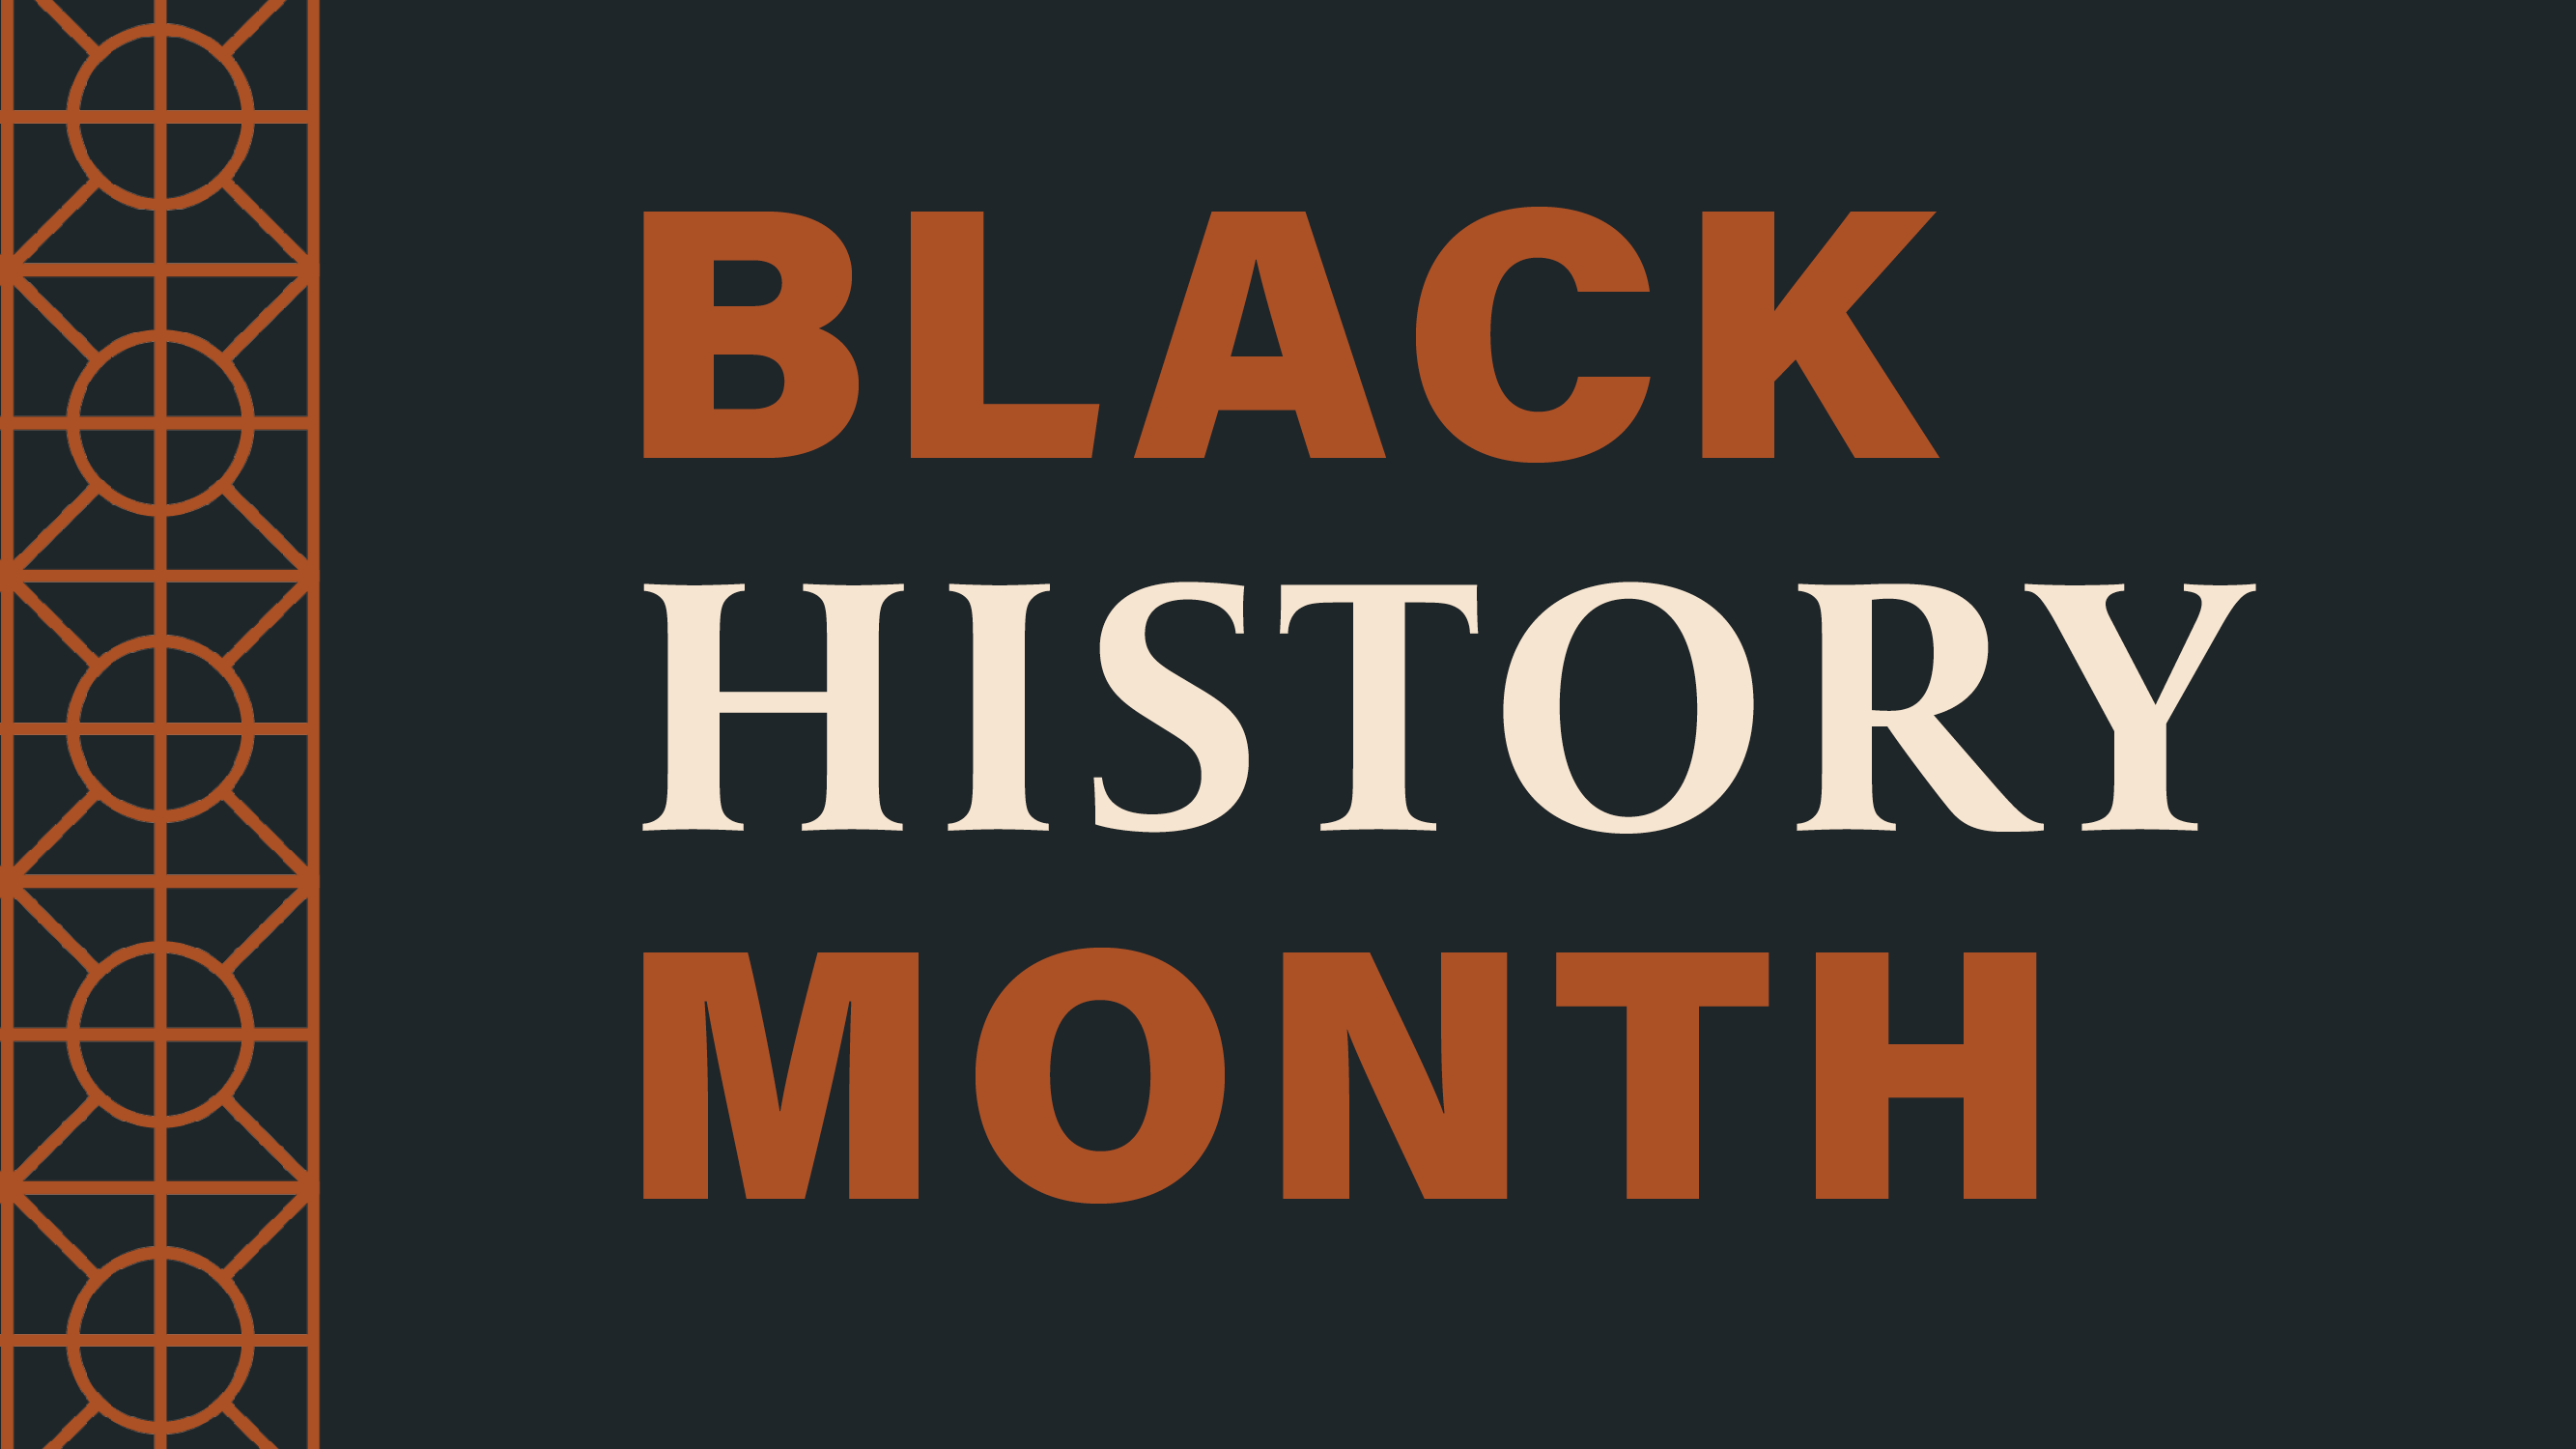 Black History Month in orange and tan text with a decorative pattern on the side